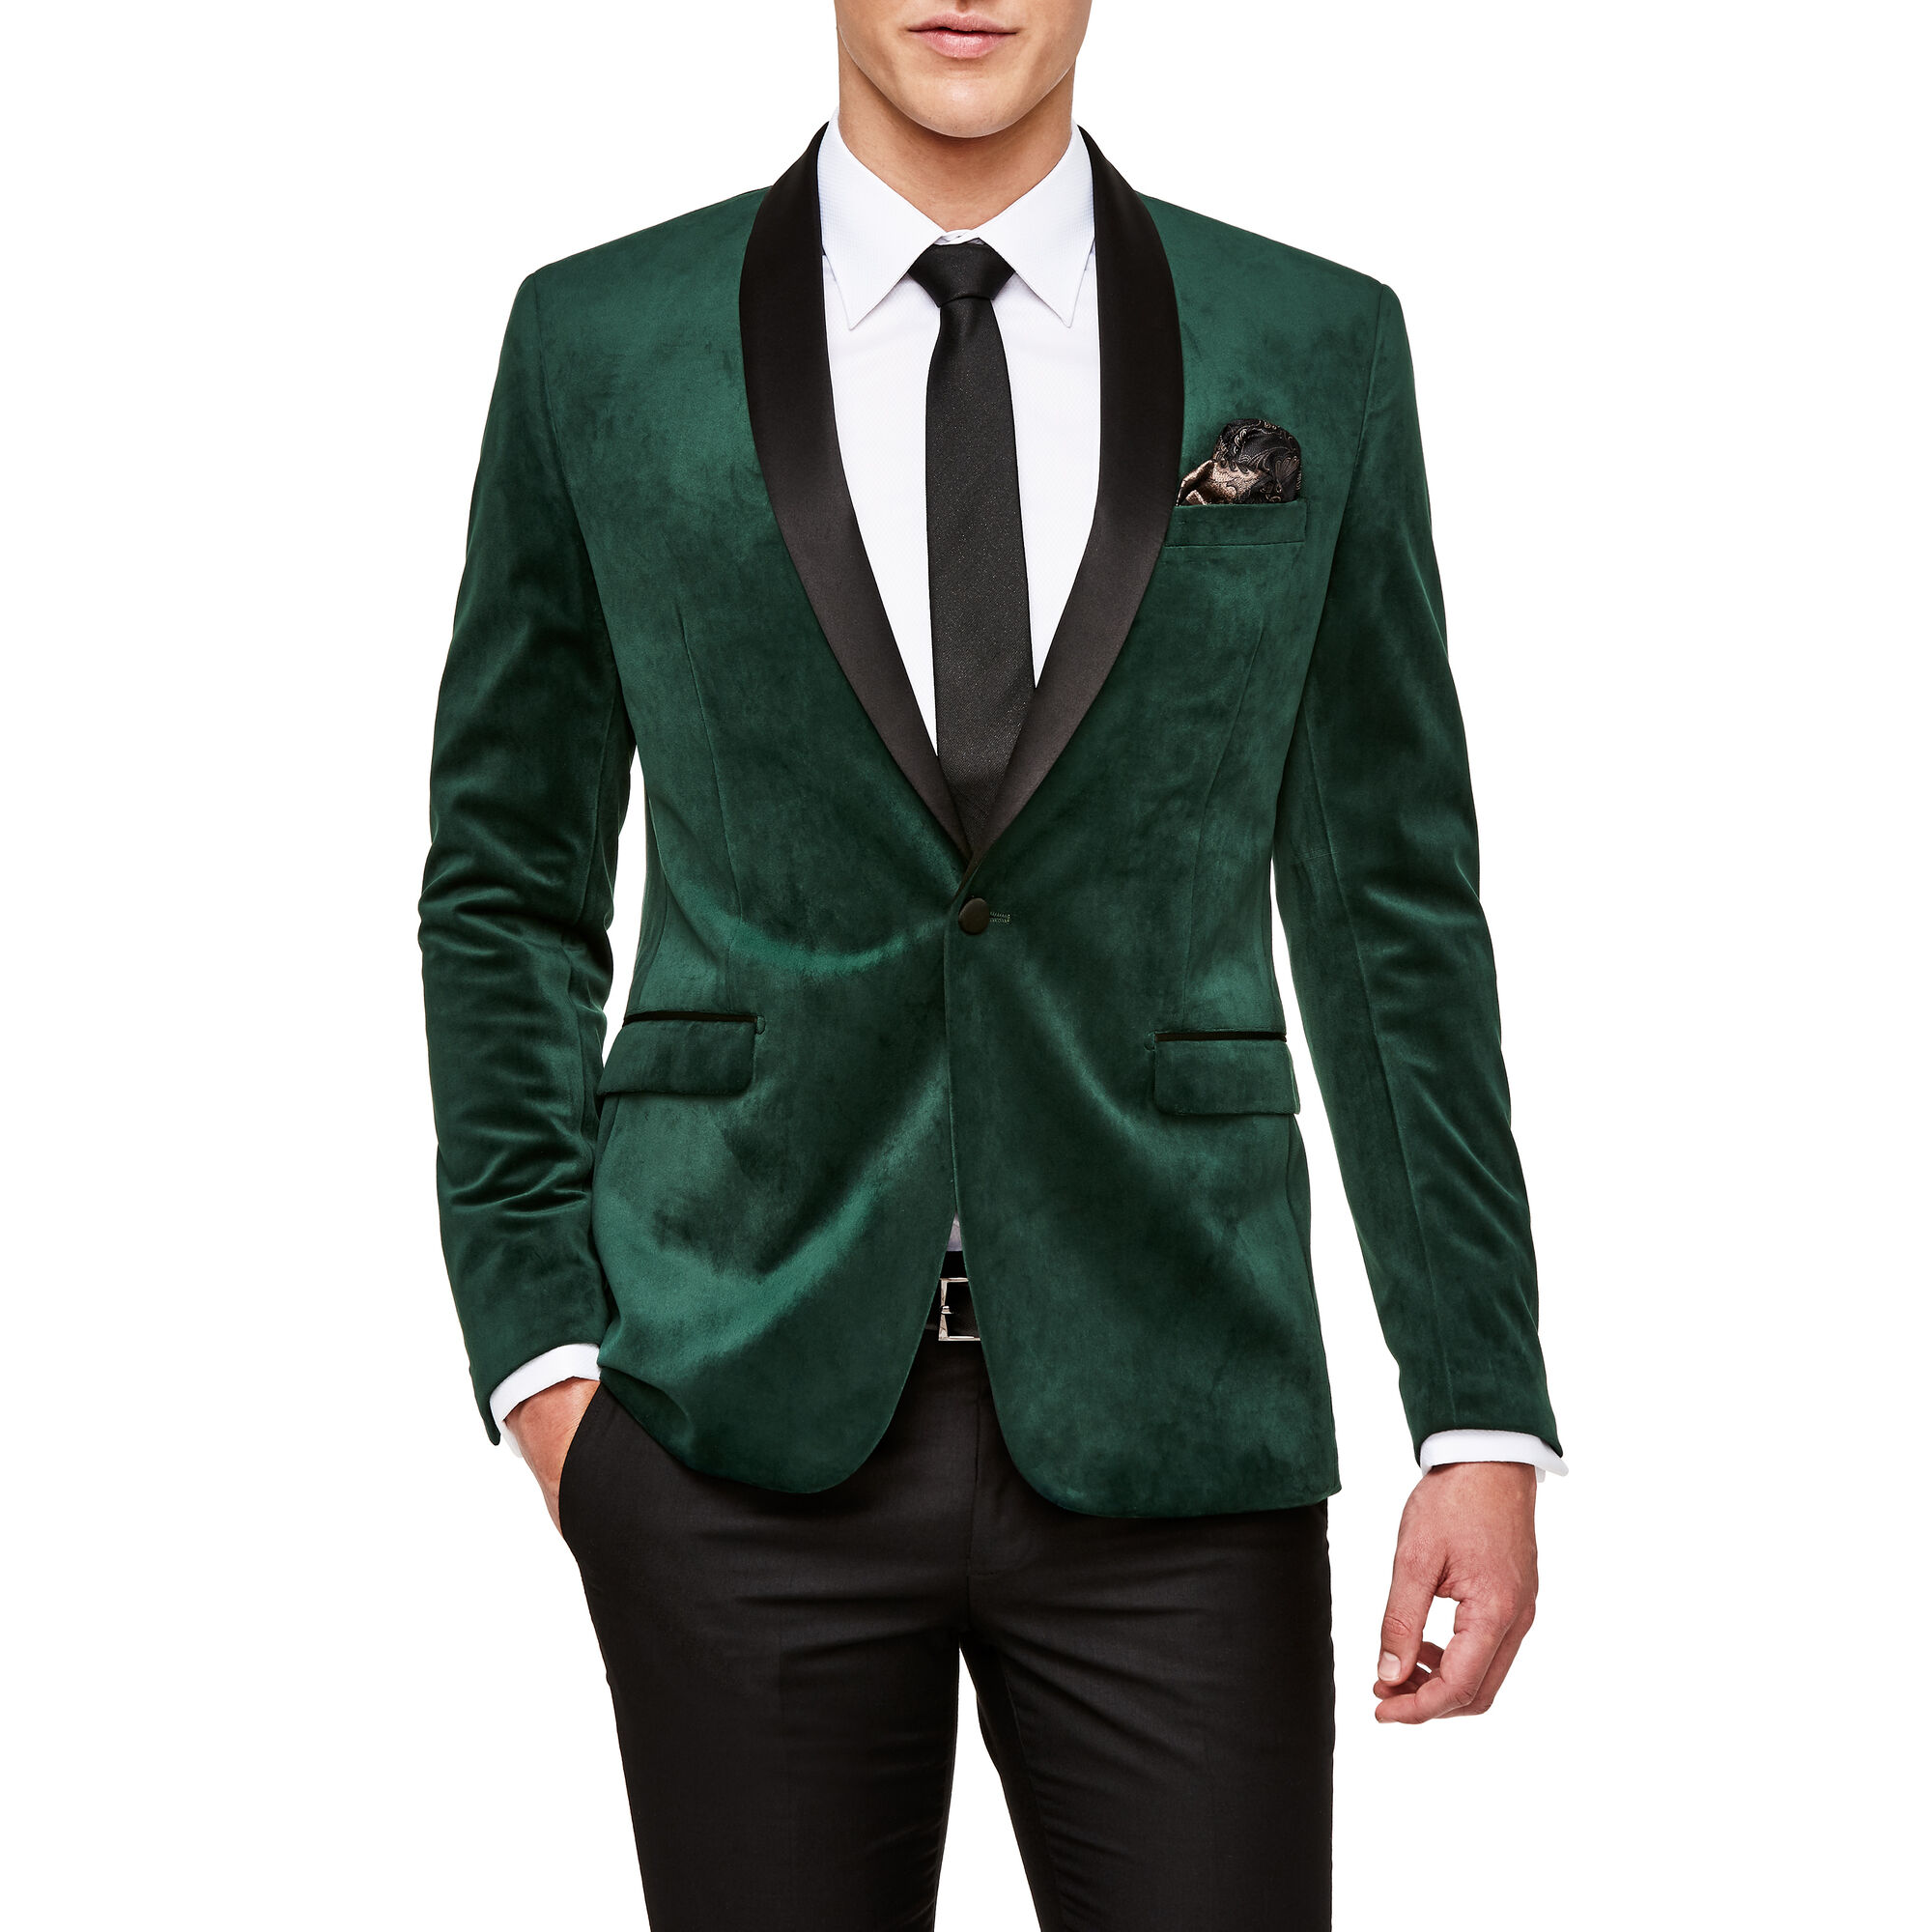 Add Some Color With A Green Velvet Blazer